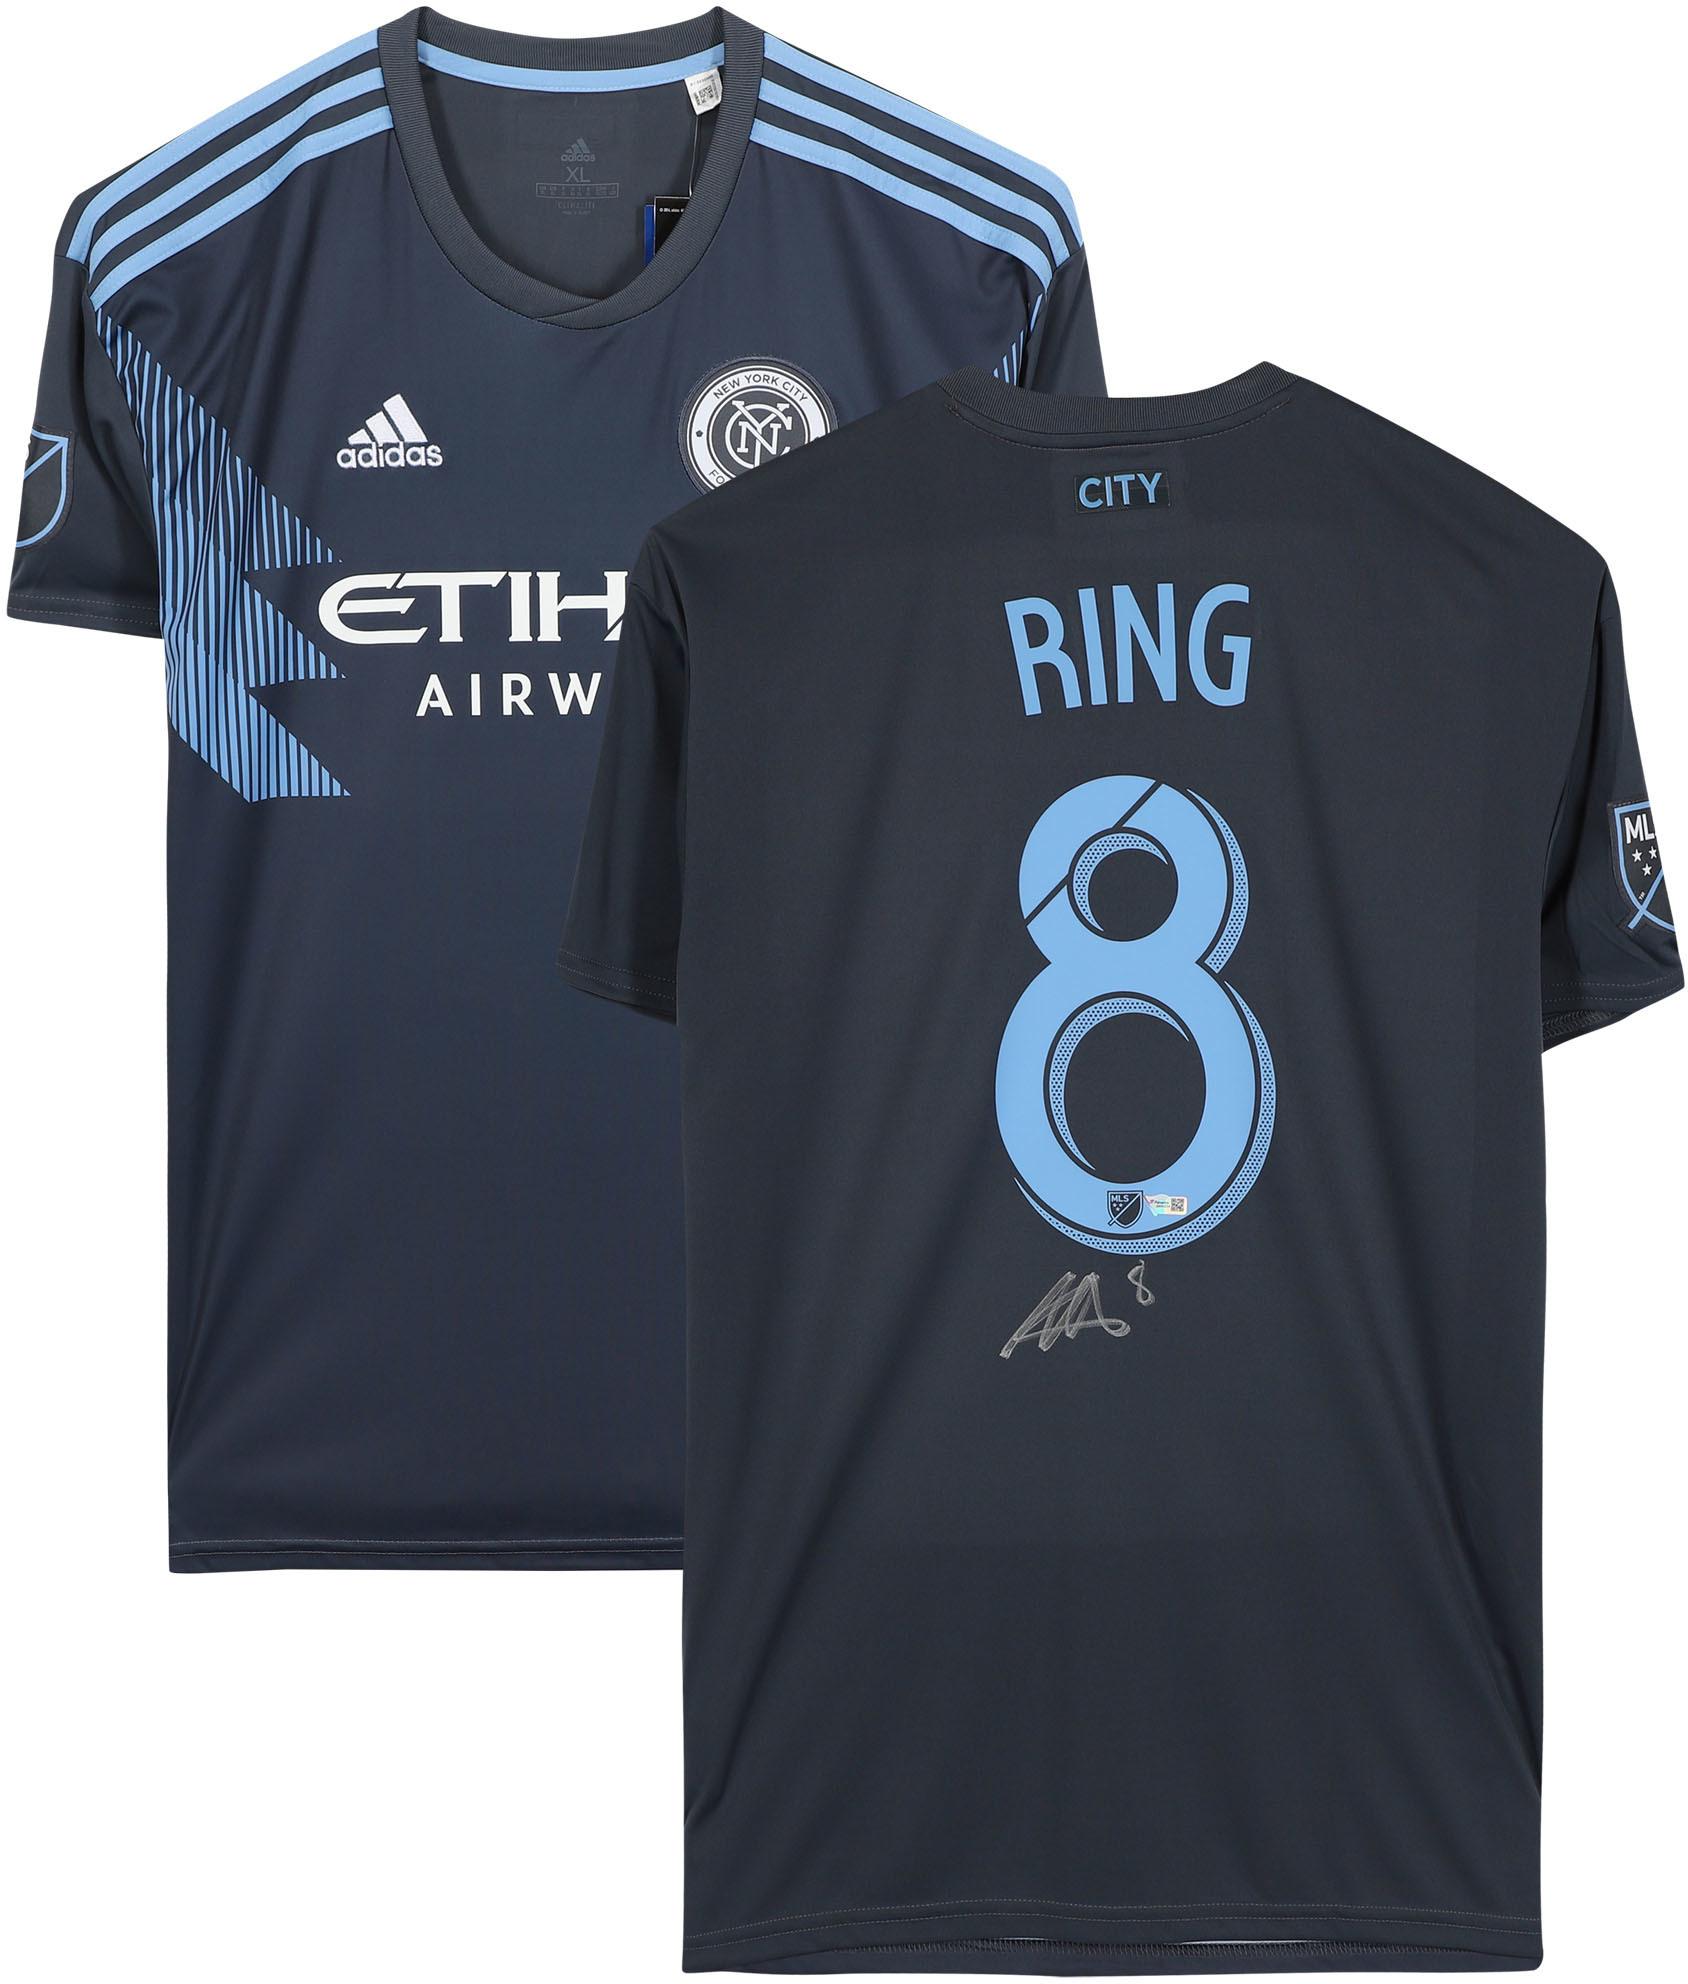 Alex Ring New York City FC Autographed Gray 2018 Adidas Replica Jersey - Fanatics Authentic Certified